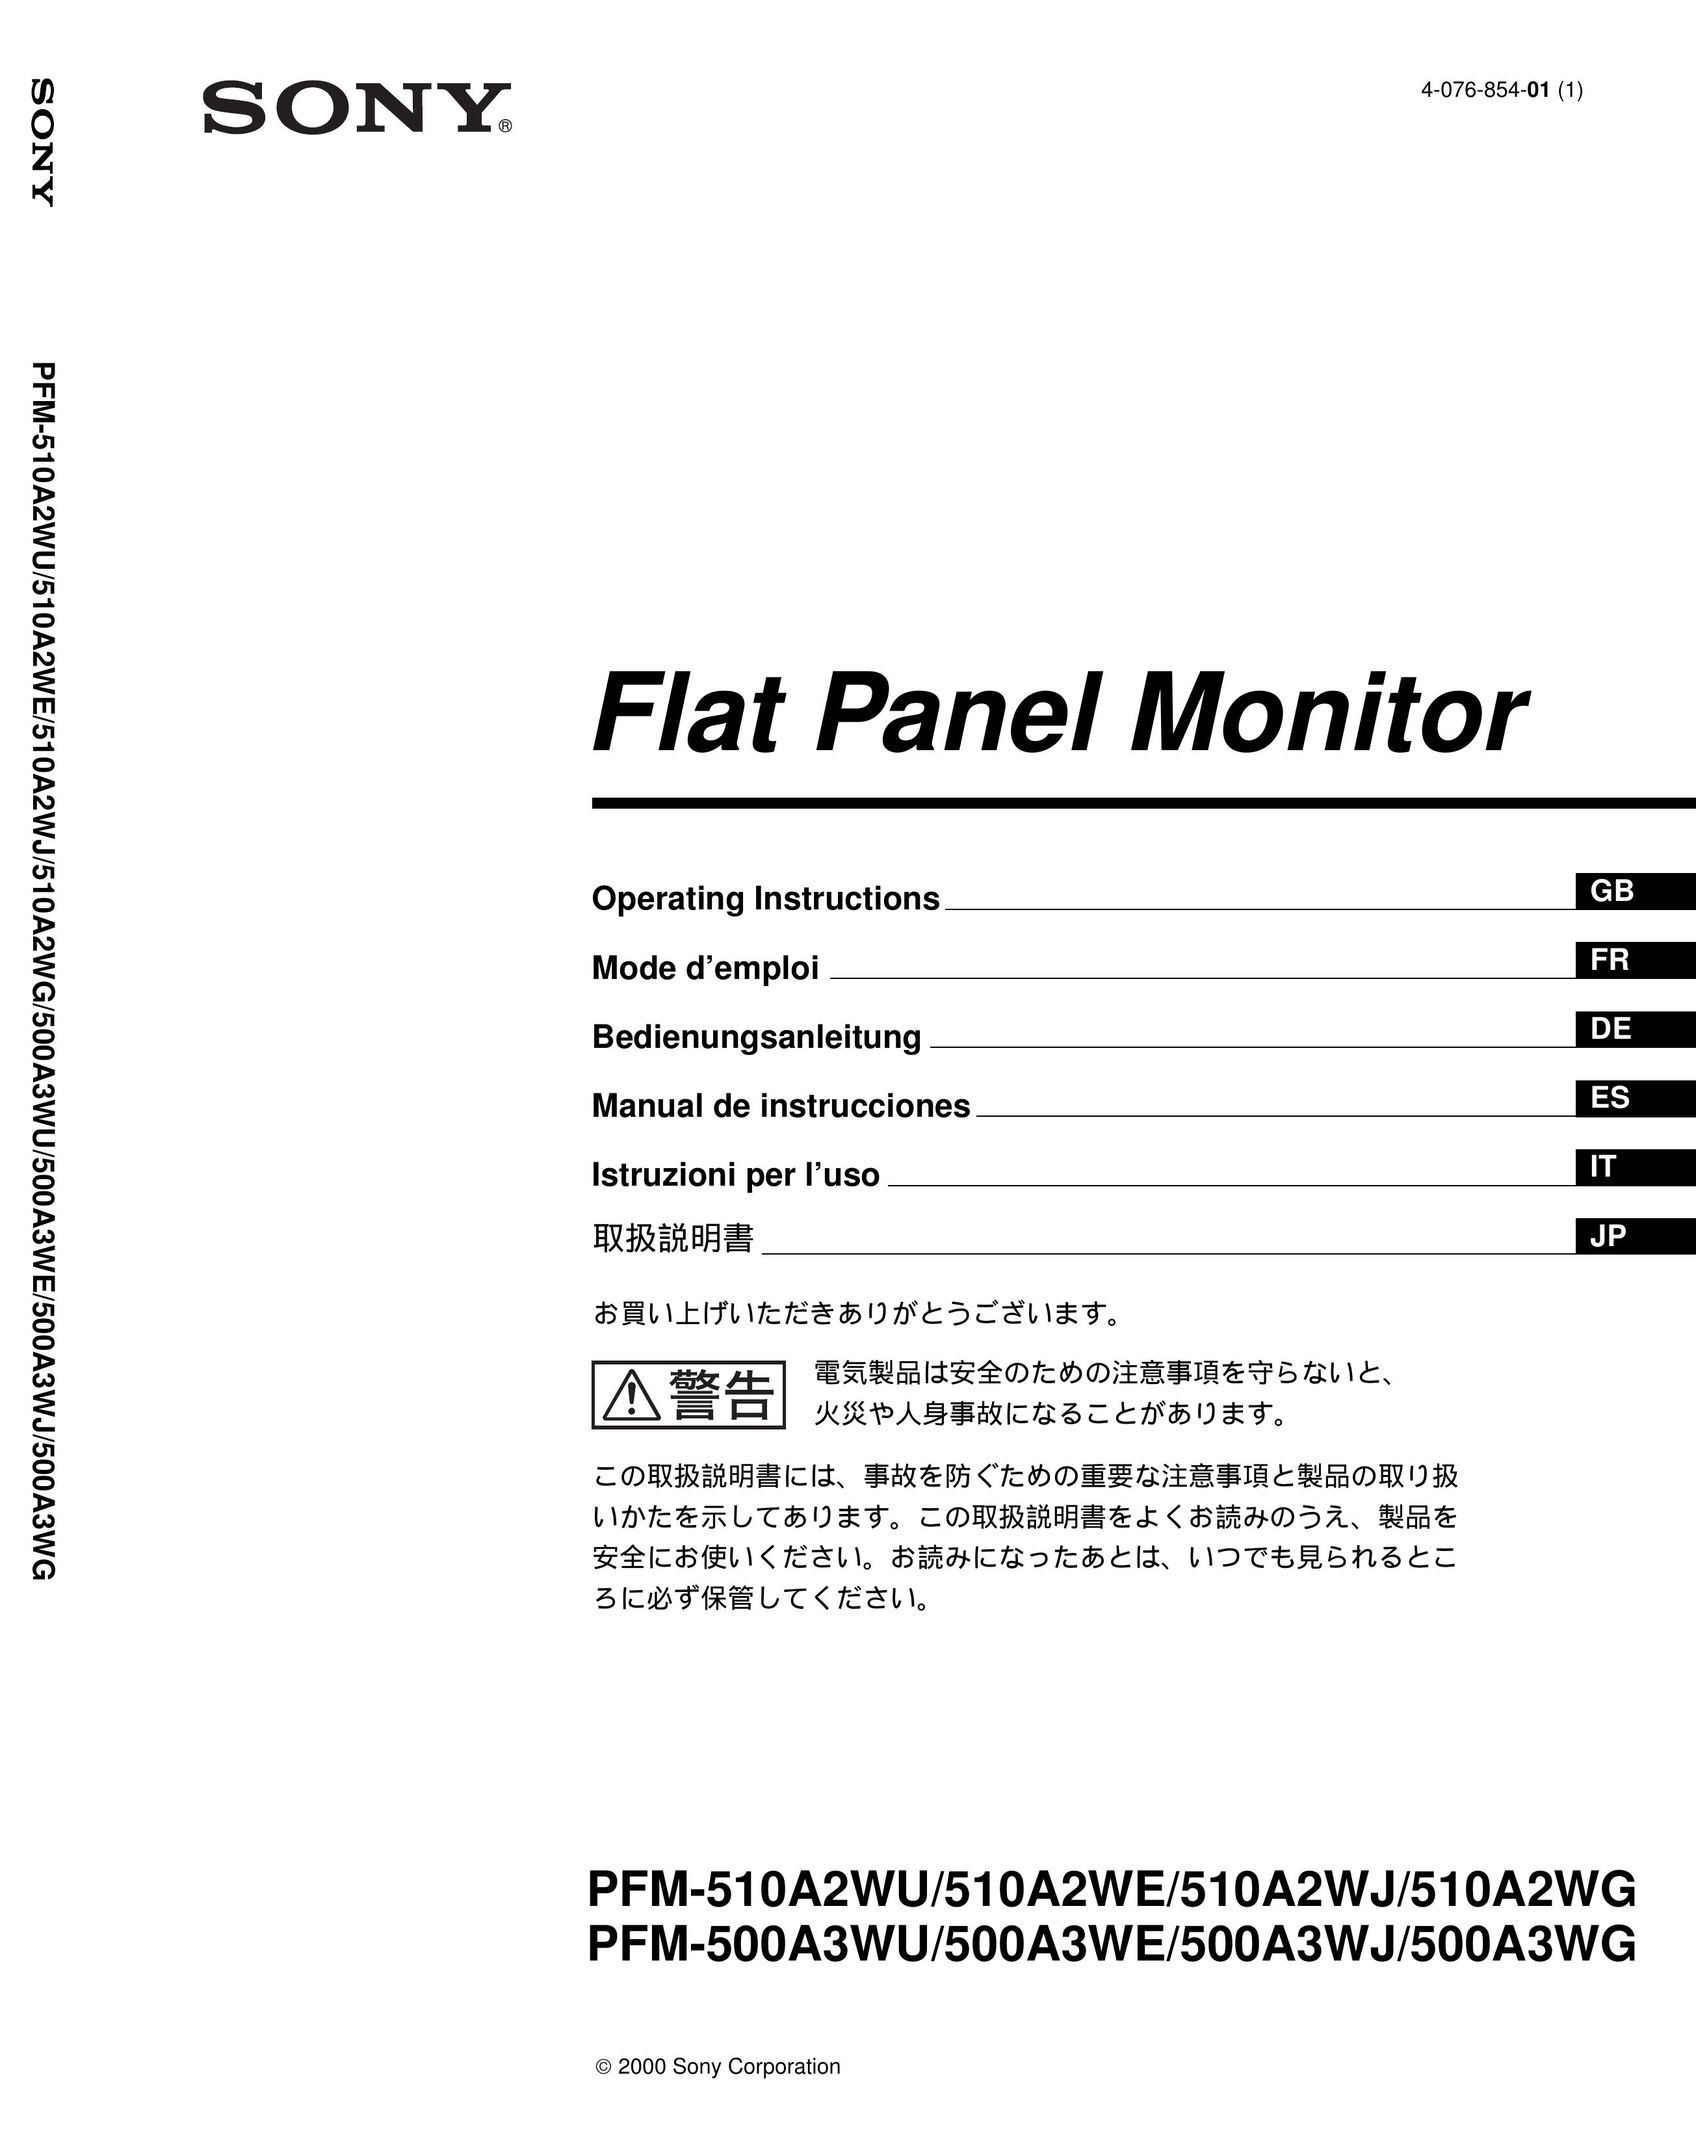 Sony 510A2WE Computer Monitor User Manual